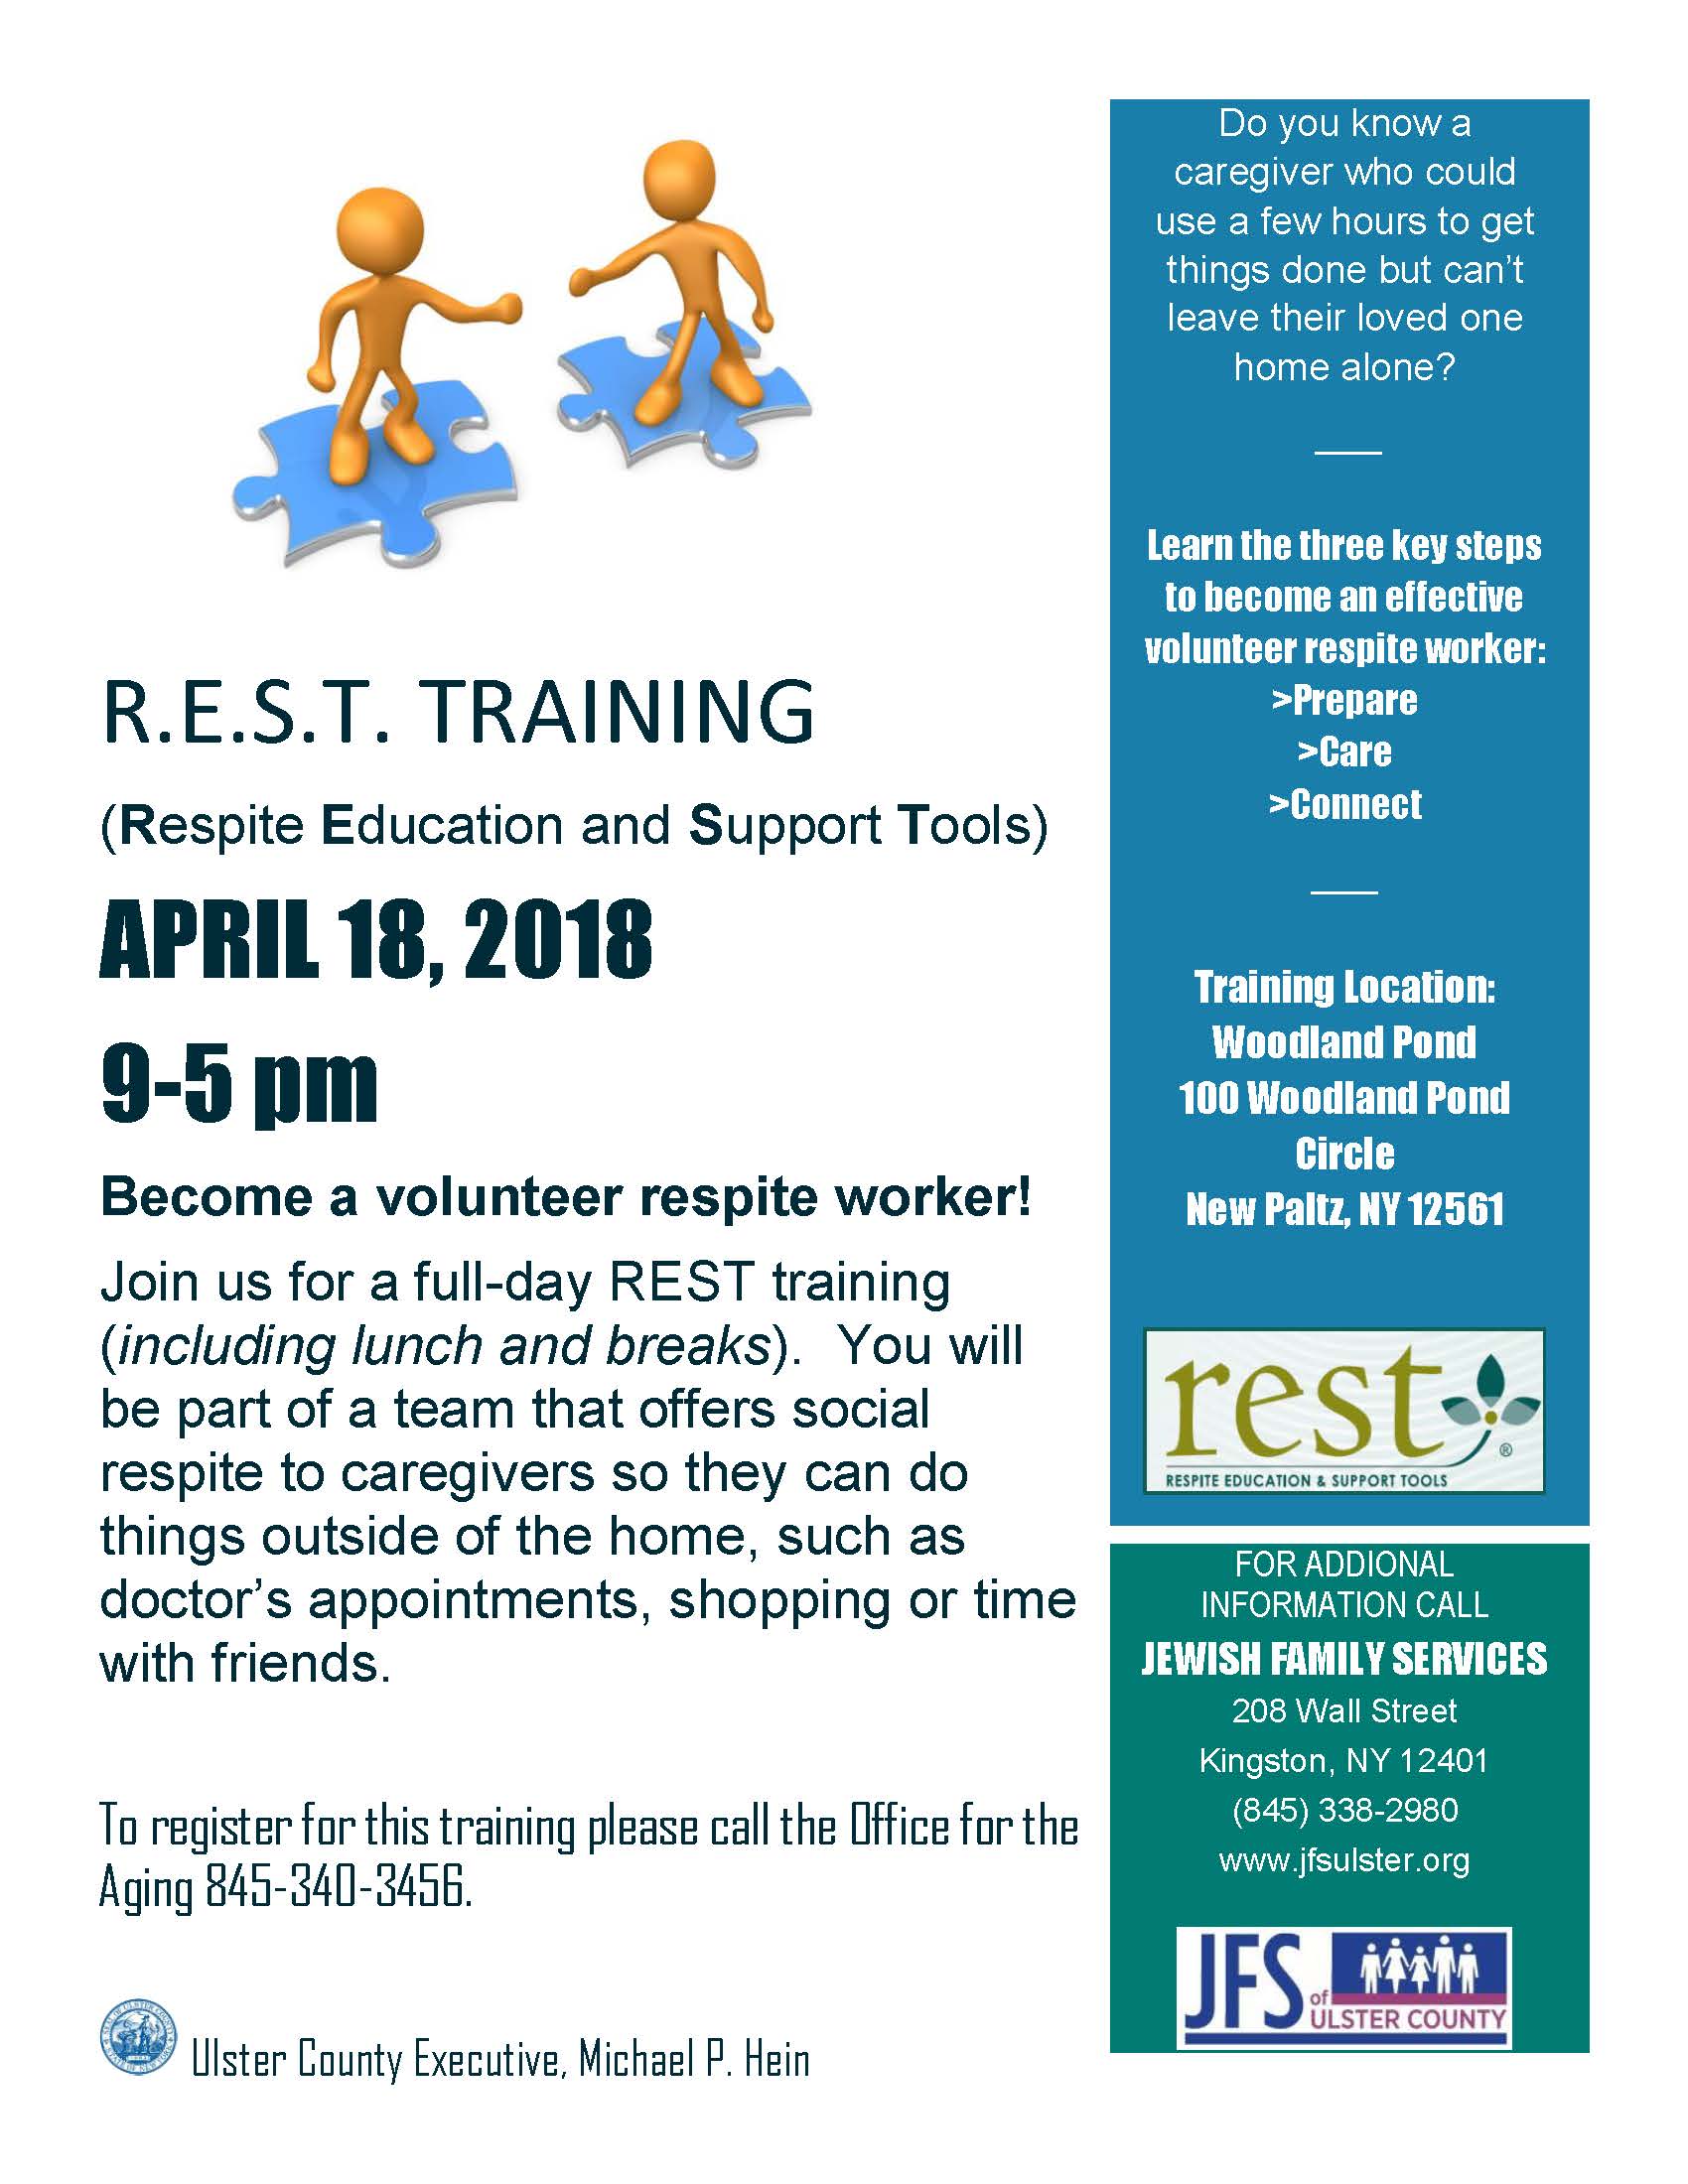 R.E.S.T. TRAINING (Respite Education and Support Tools)